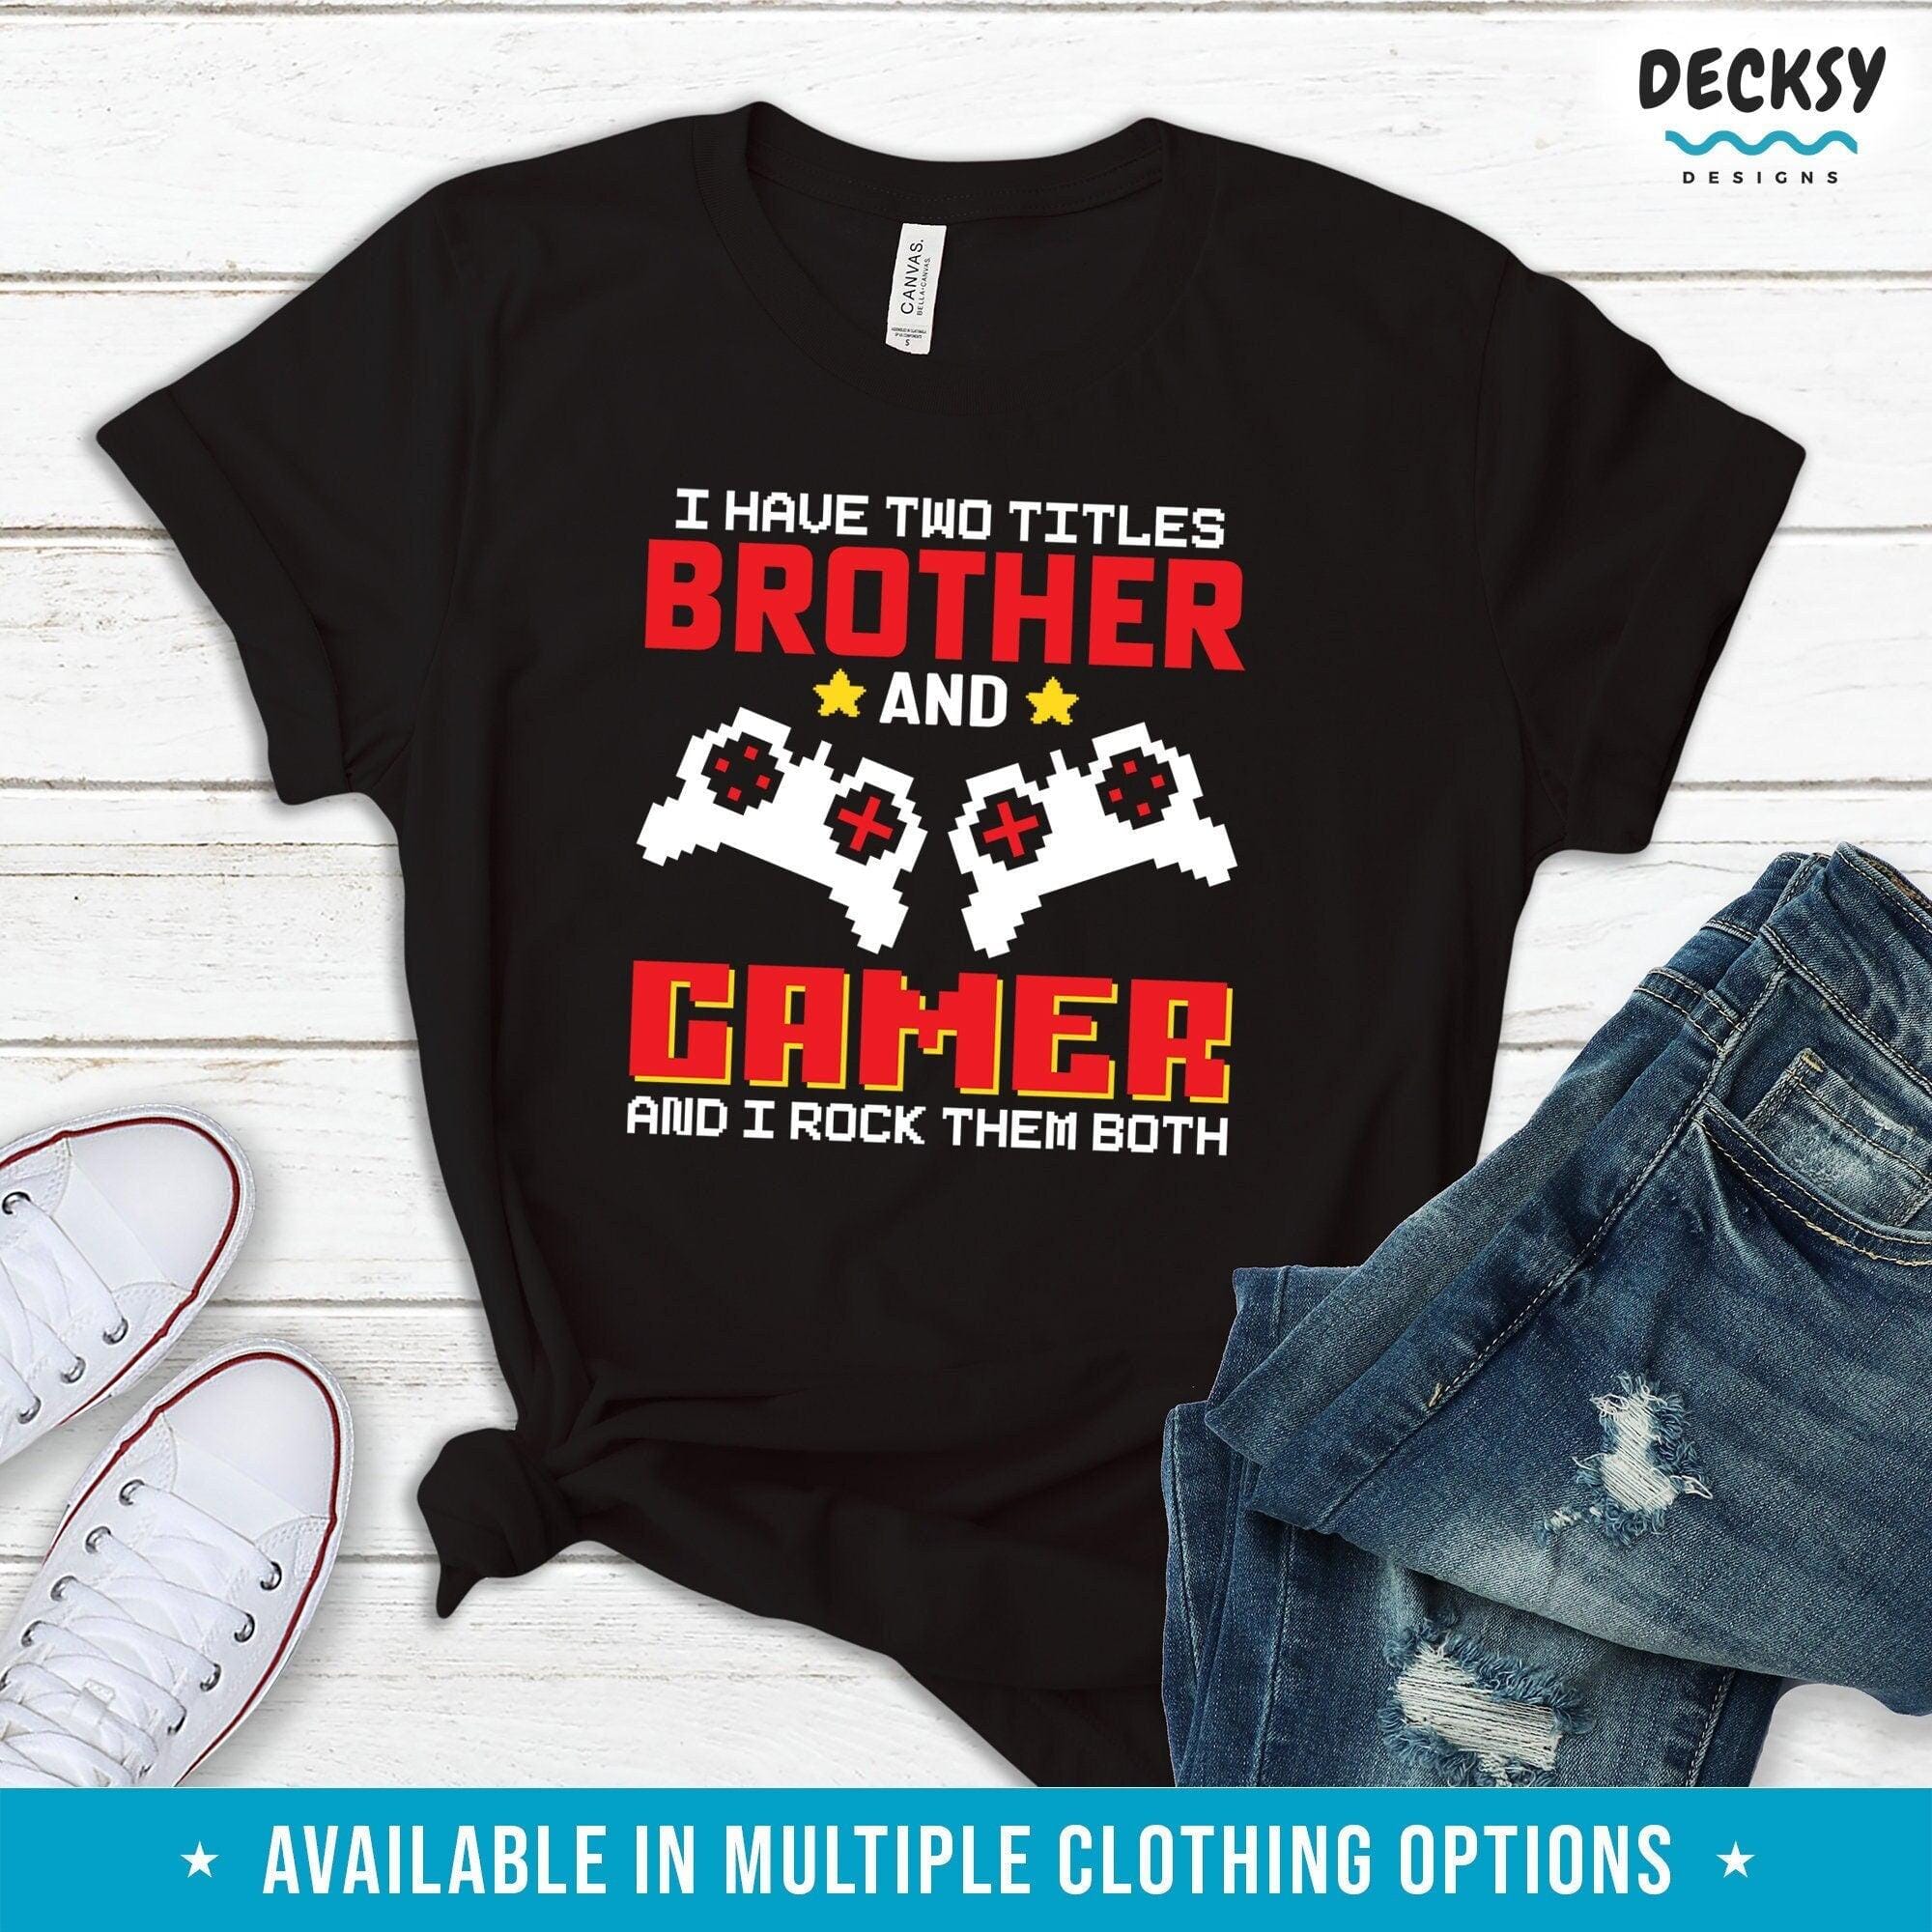 Gaming Shirt, Big Brother Gift-Clothing:Gender-Neutral Adult Clothing:Tops & Tees:T-shirts:Graphic Tees-DecksyDesigns